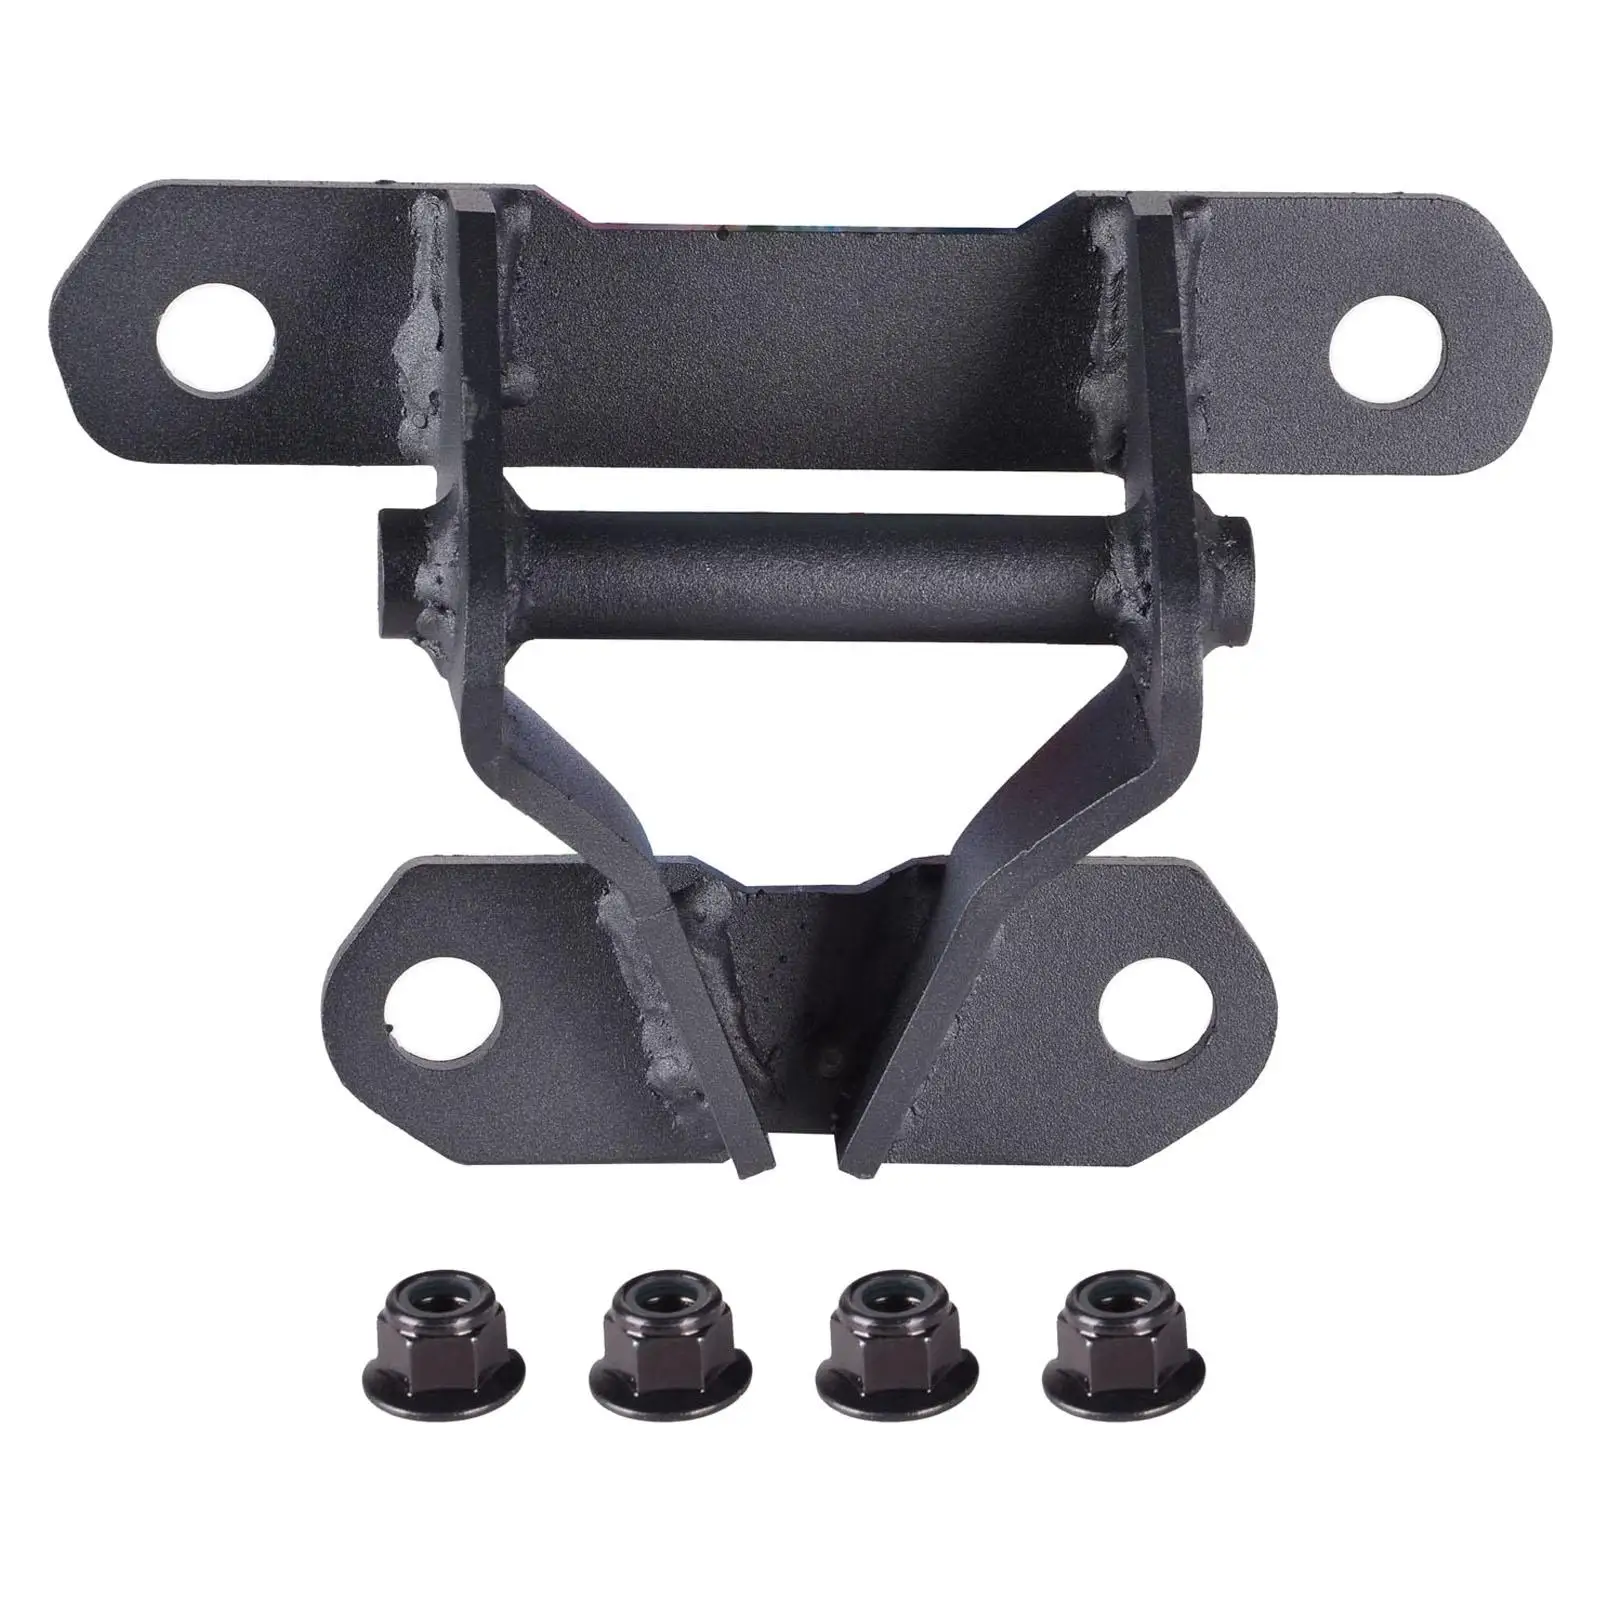 Exterior UTV Rear Pull Plate Tow Hook High Strength Moulding Iron Replacement for Canam x3 / x3 Max 18-2021 715004450 Parts